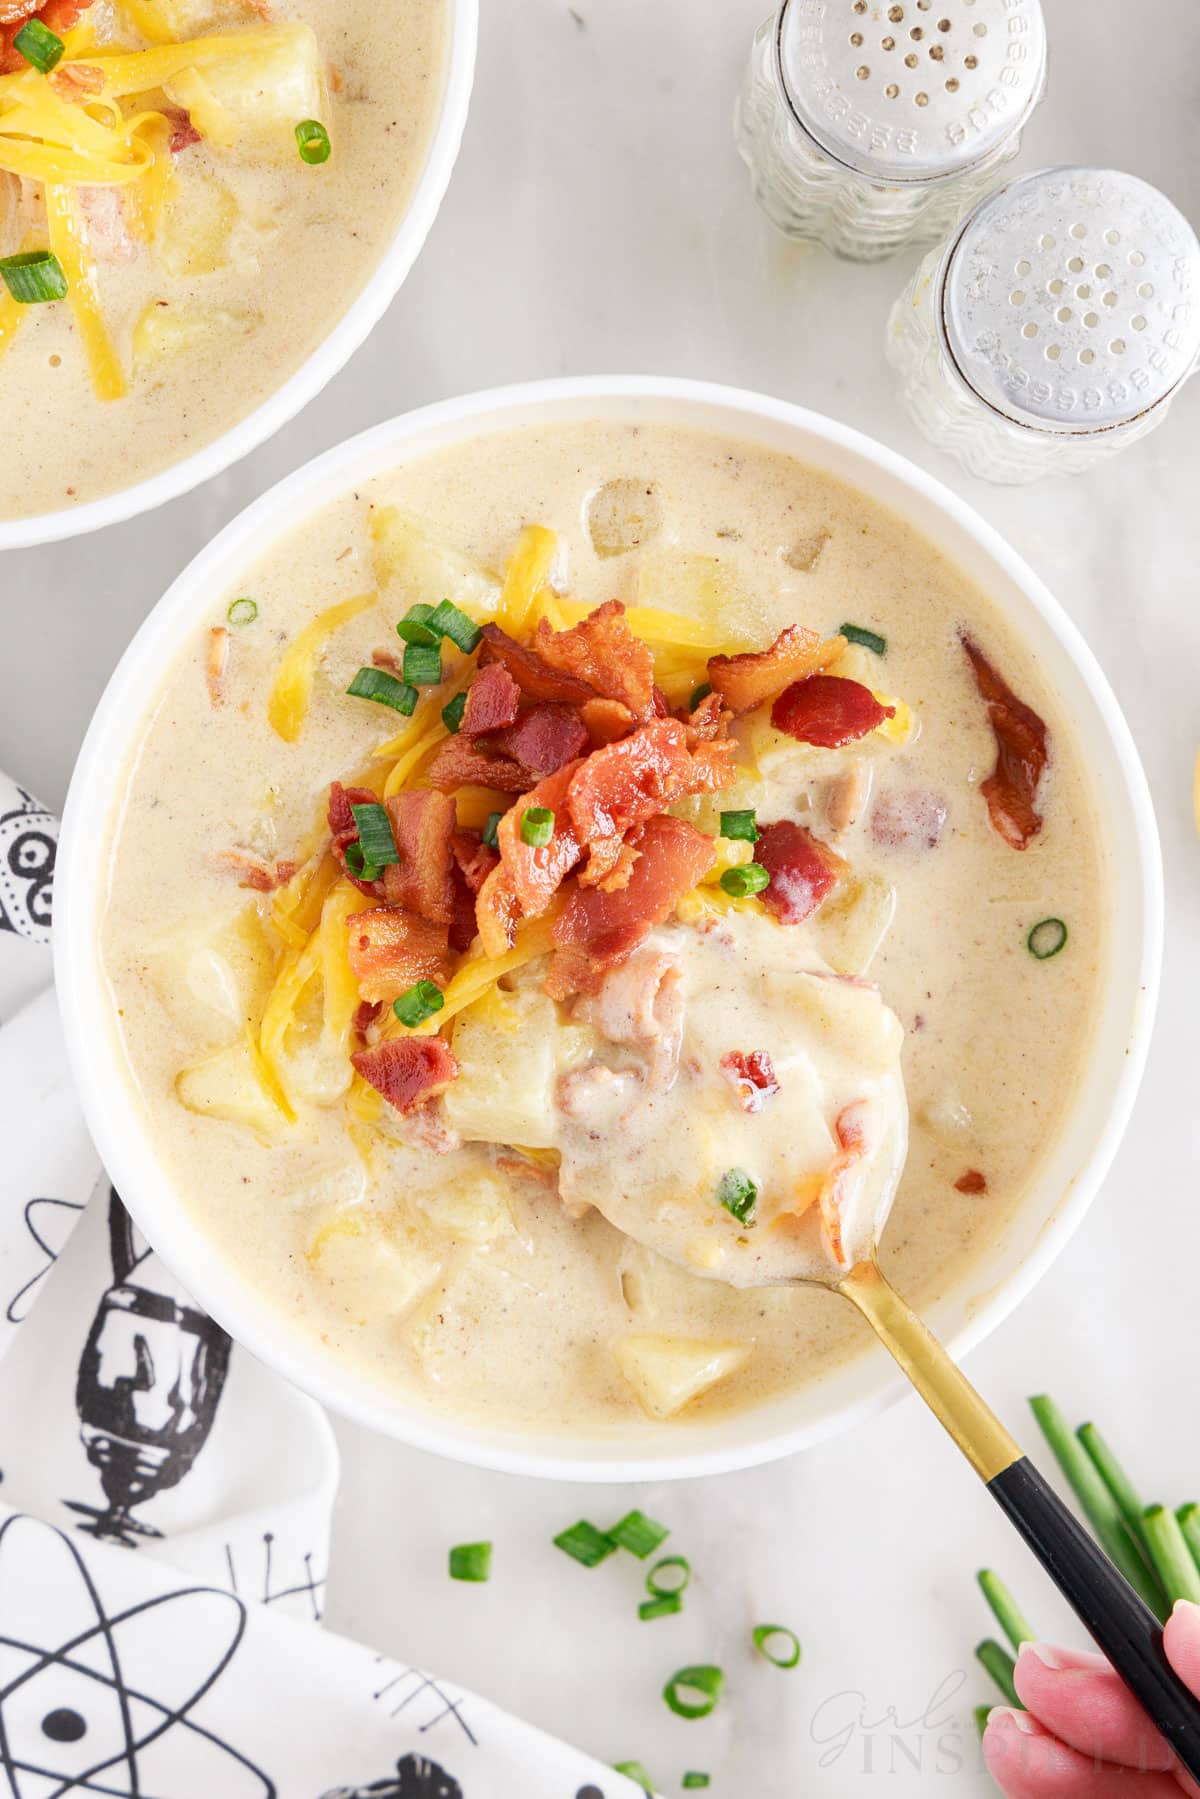 a spoon in a bowl of baked potato soup